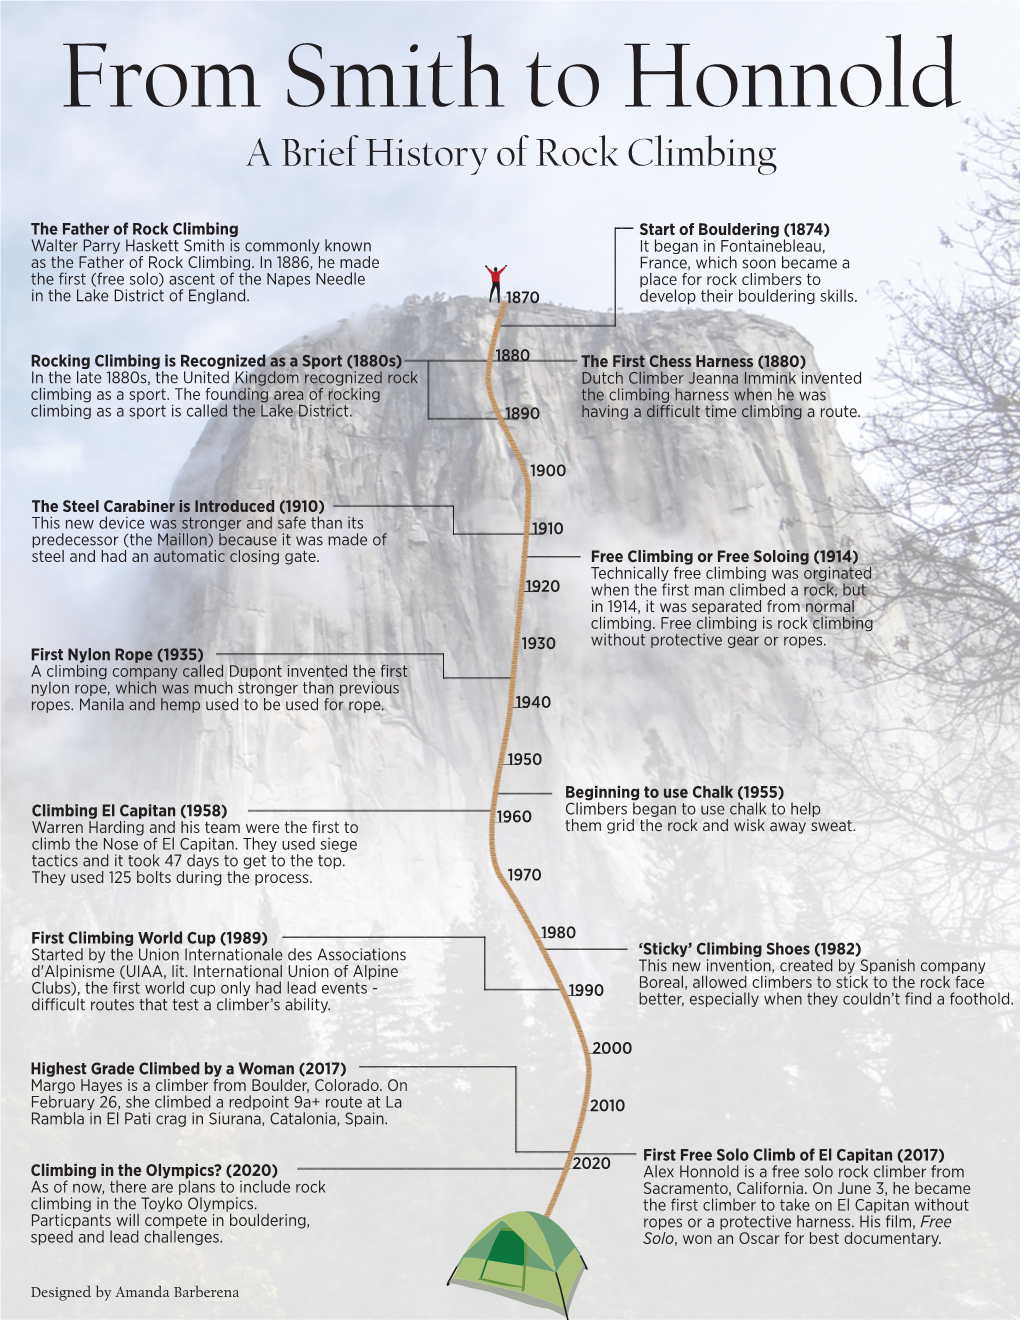 From Smith to Honnold a Brief History of Rock Climbing